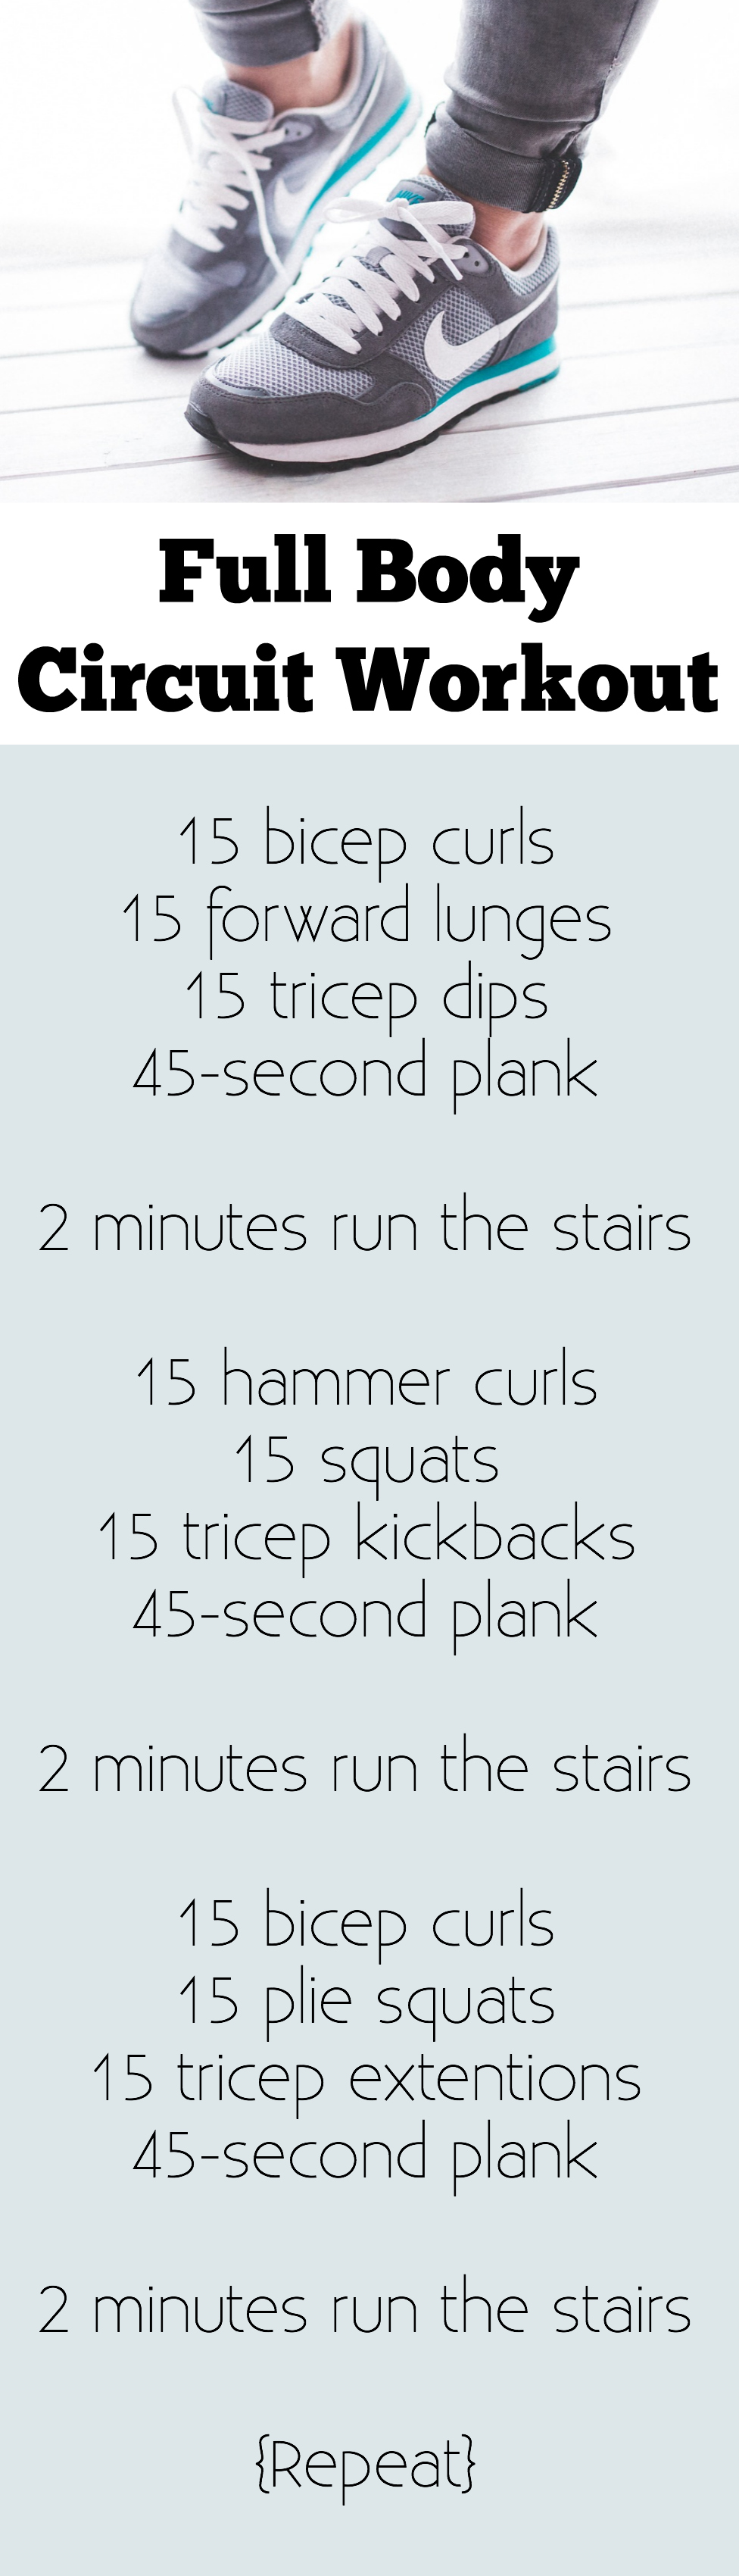 A perfect at home full body circuit, especially if your house has stairs! You can do this entire workout with a set of dumbbells or a resistance band. Includes modifications for diastasis recti.